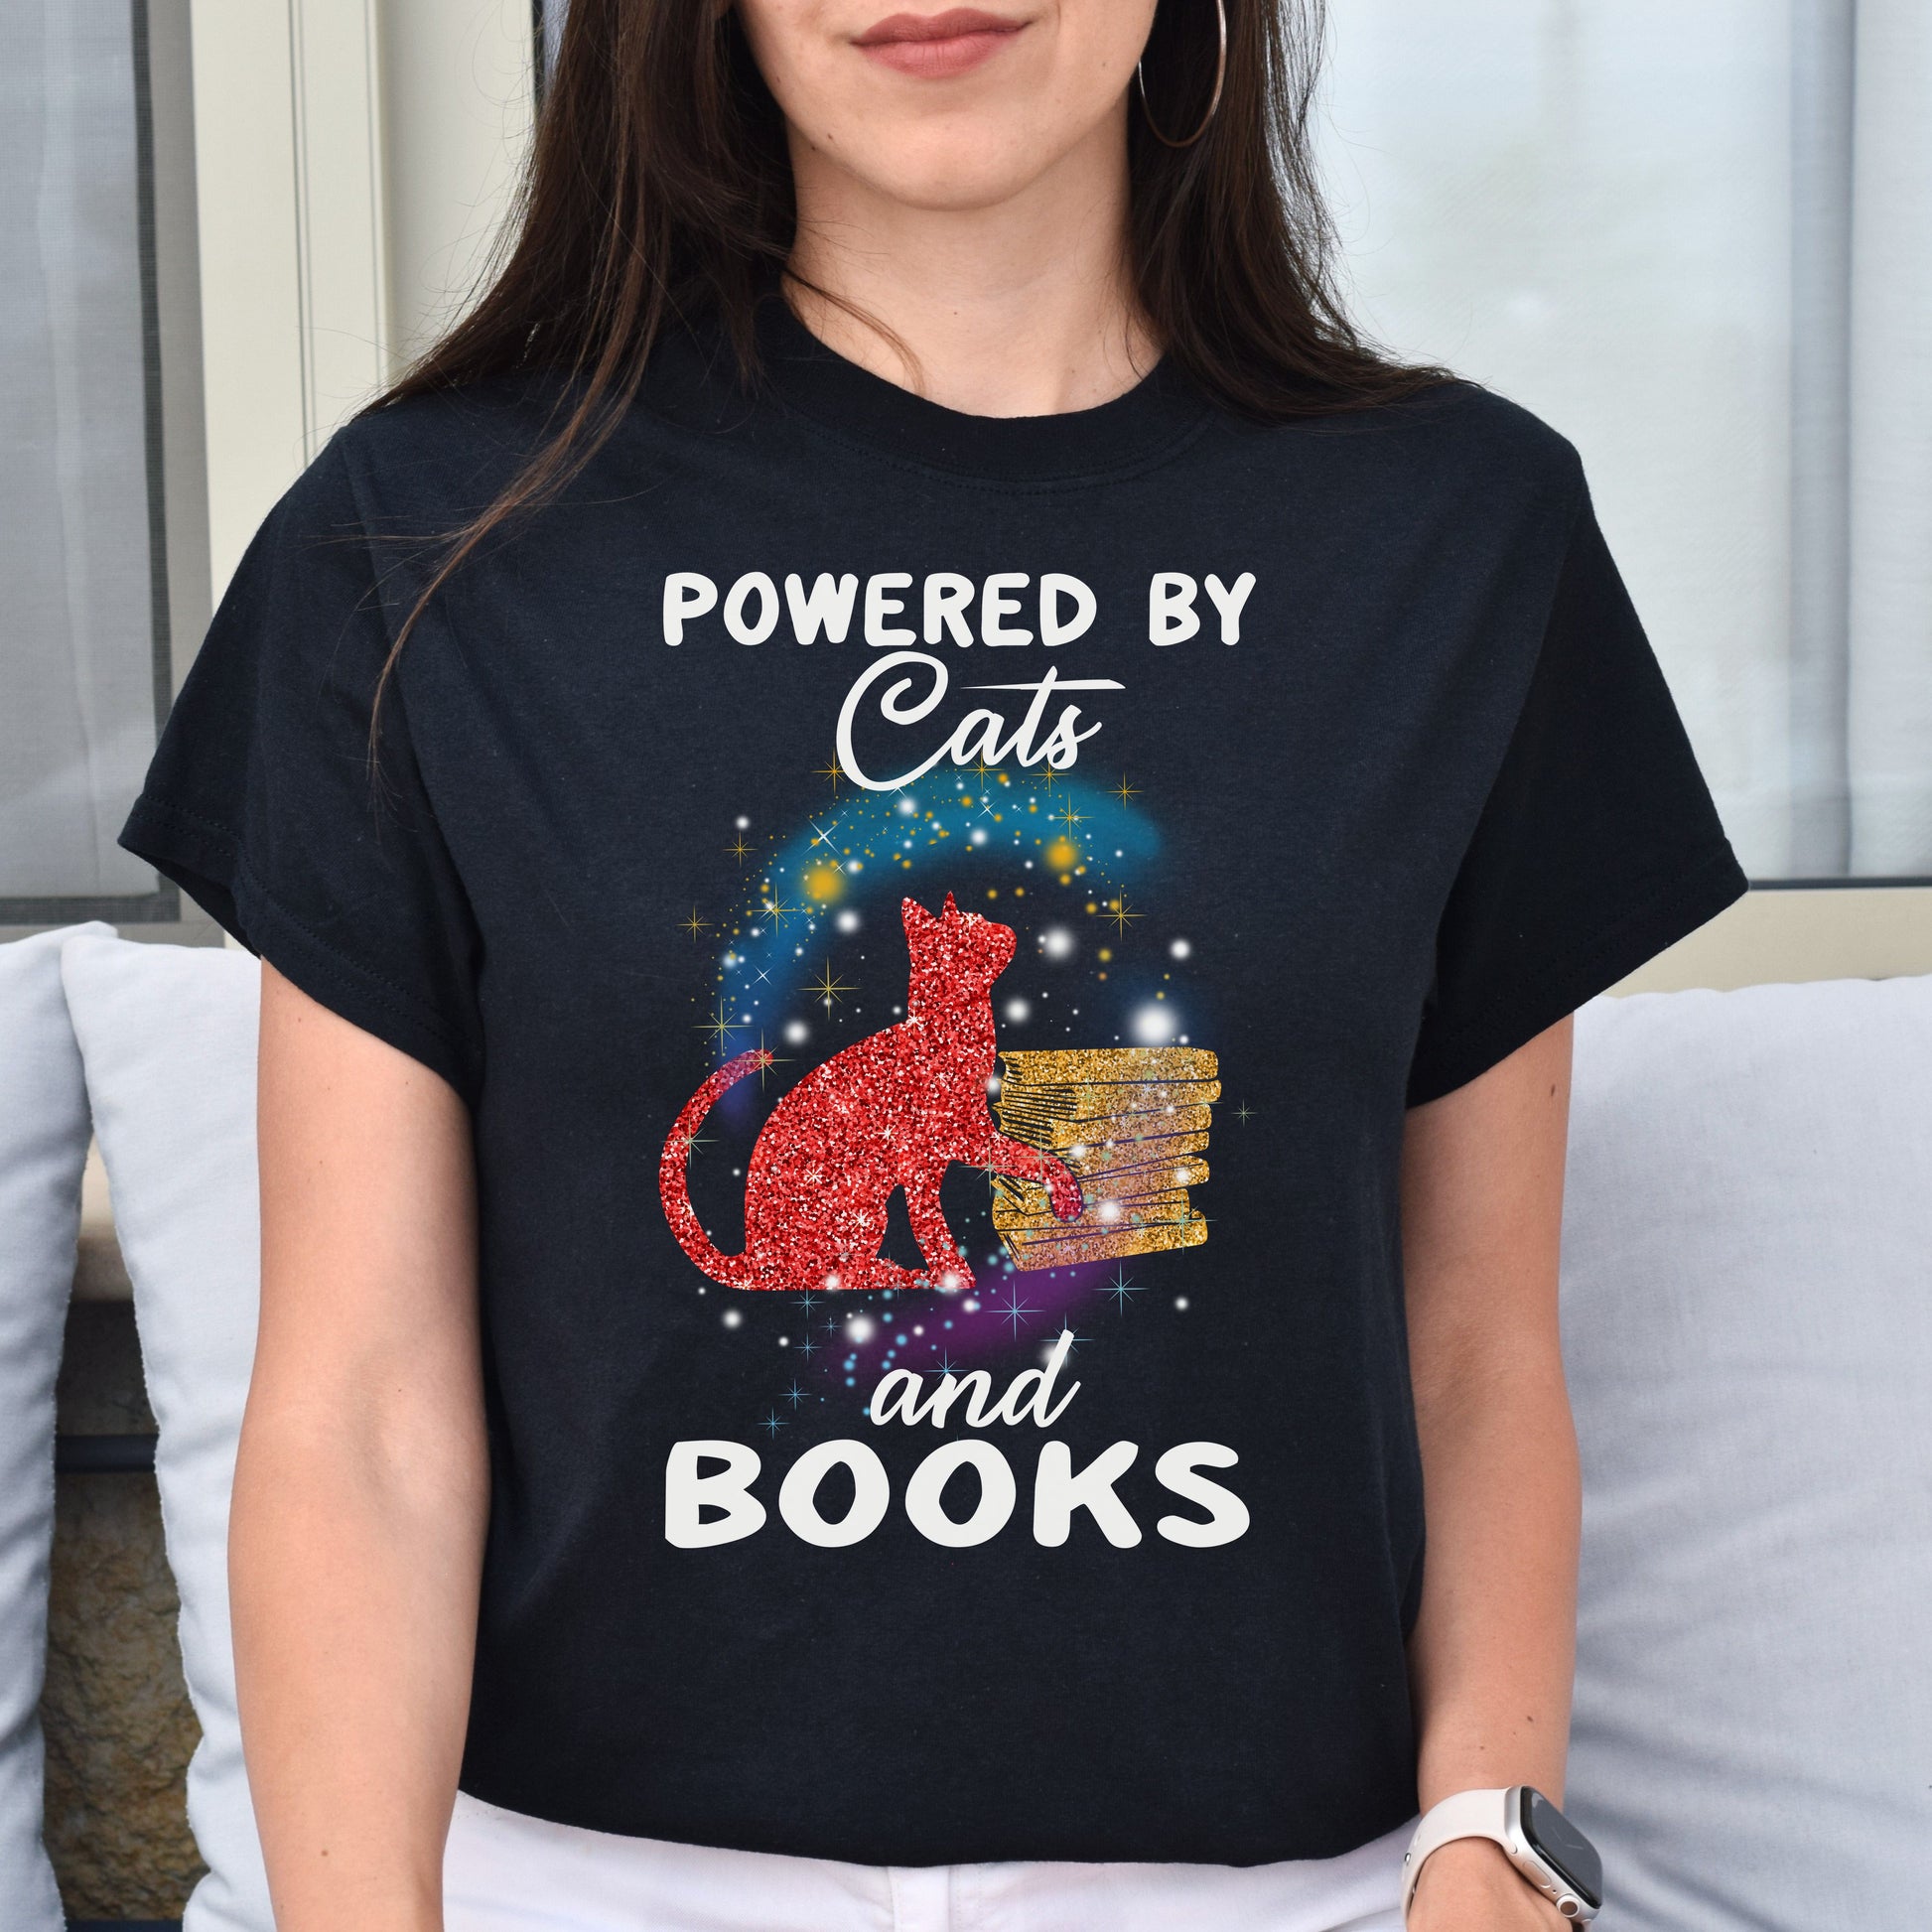 Powered by cats and books Unisex shirt Black Dark Heather-Black-Family-Gift-Planet